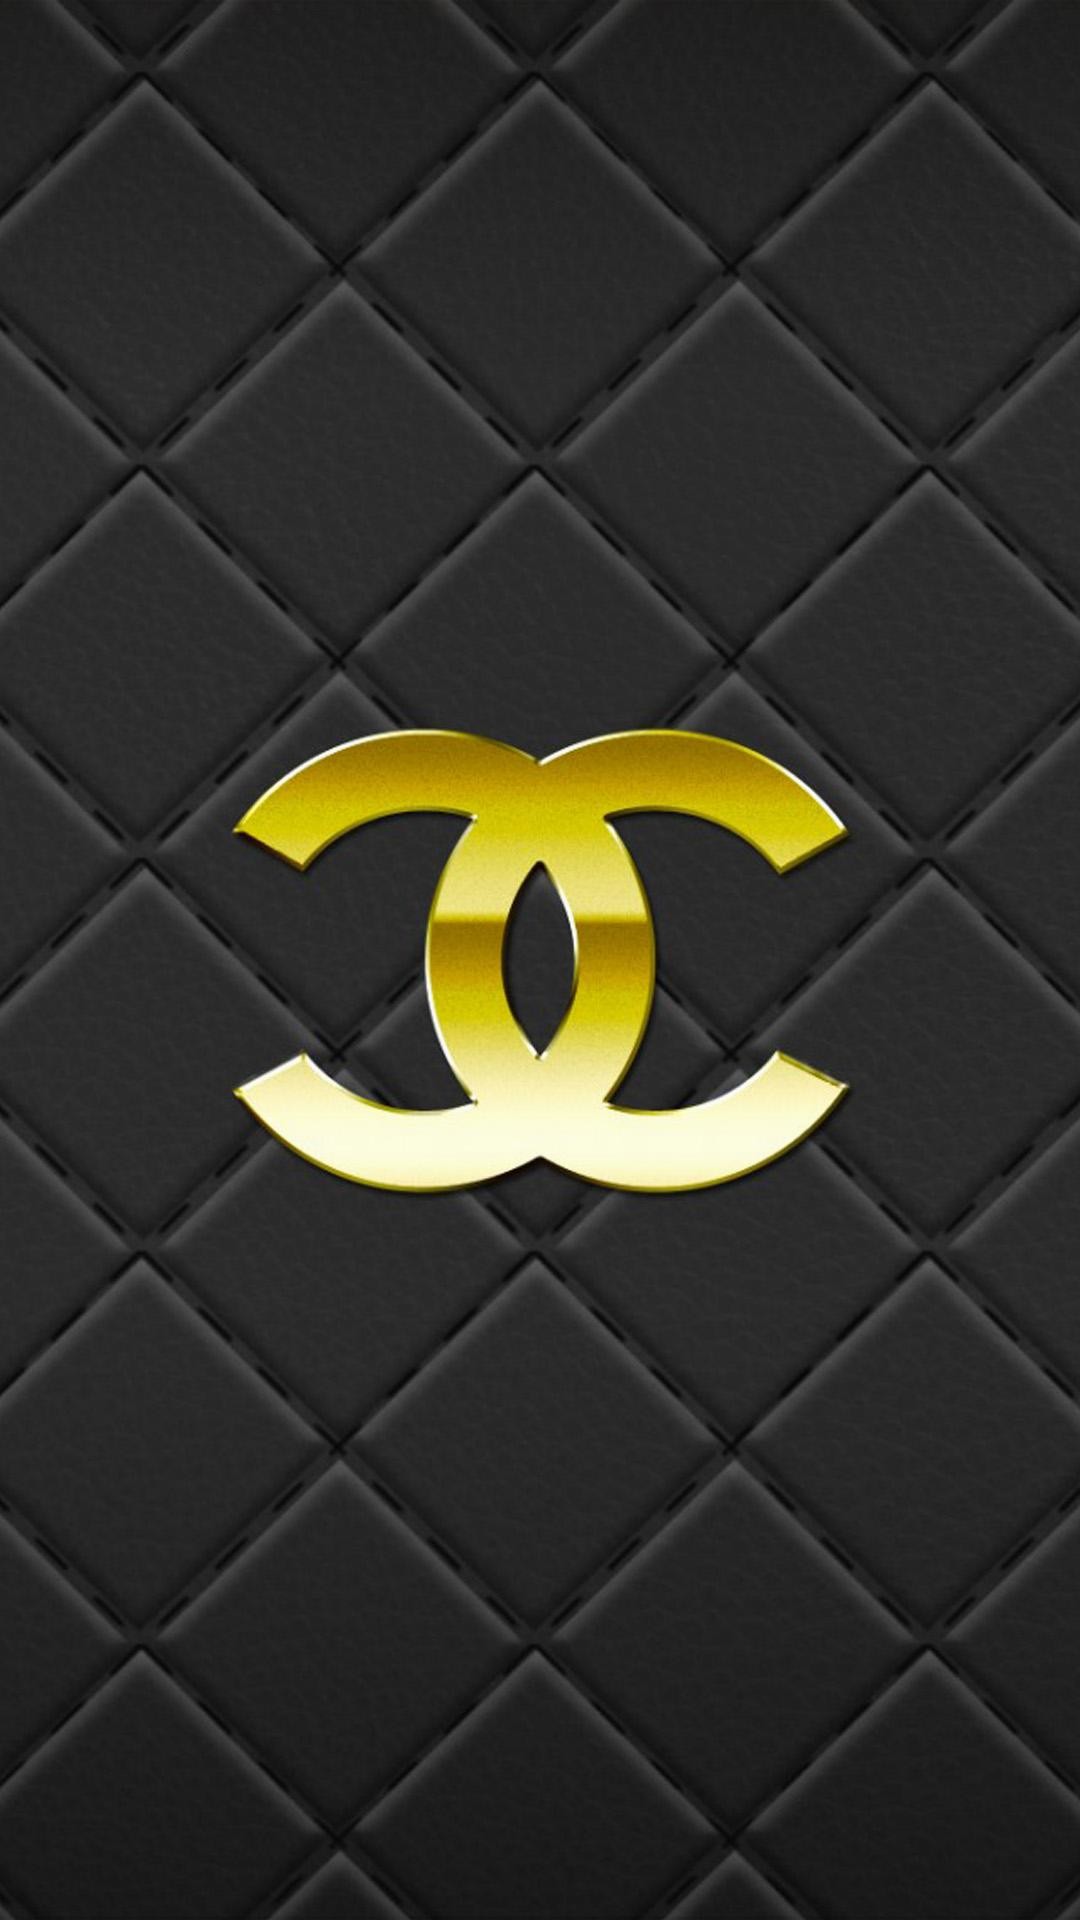 1080x1920 wallpaper.wiki-Chanel-iPhone-Wallpapers-HD-PIC-WPC007212